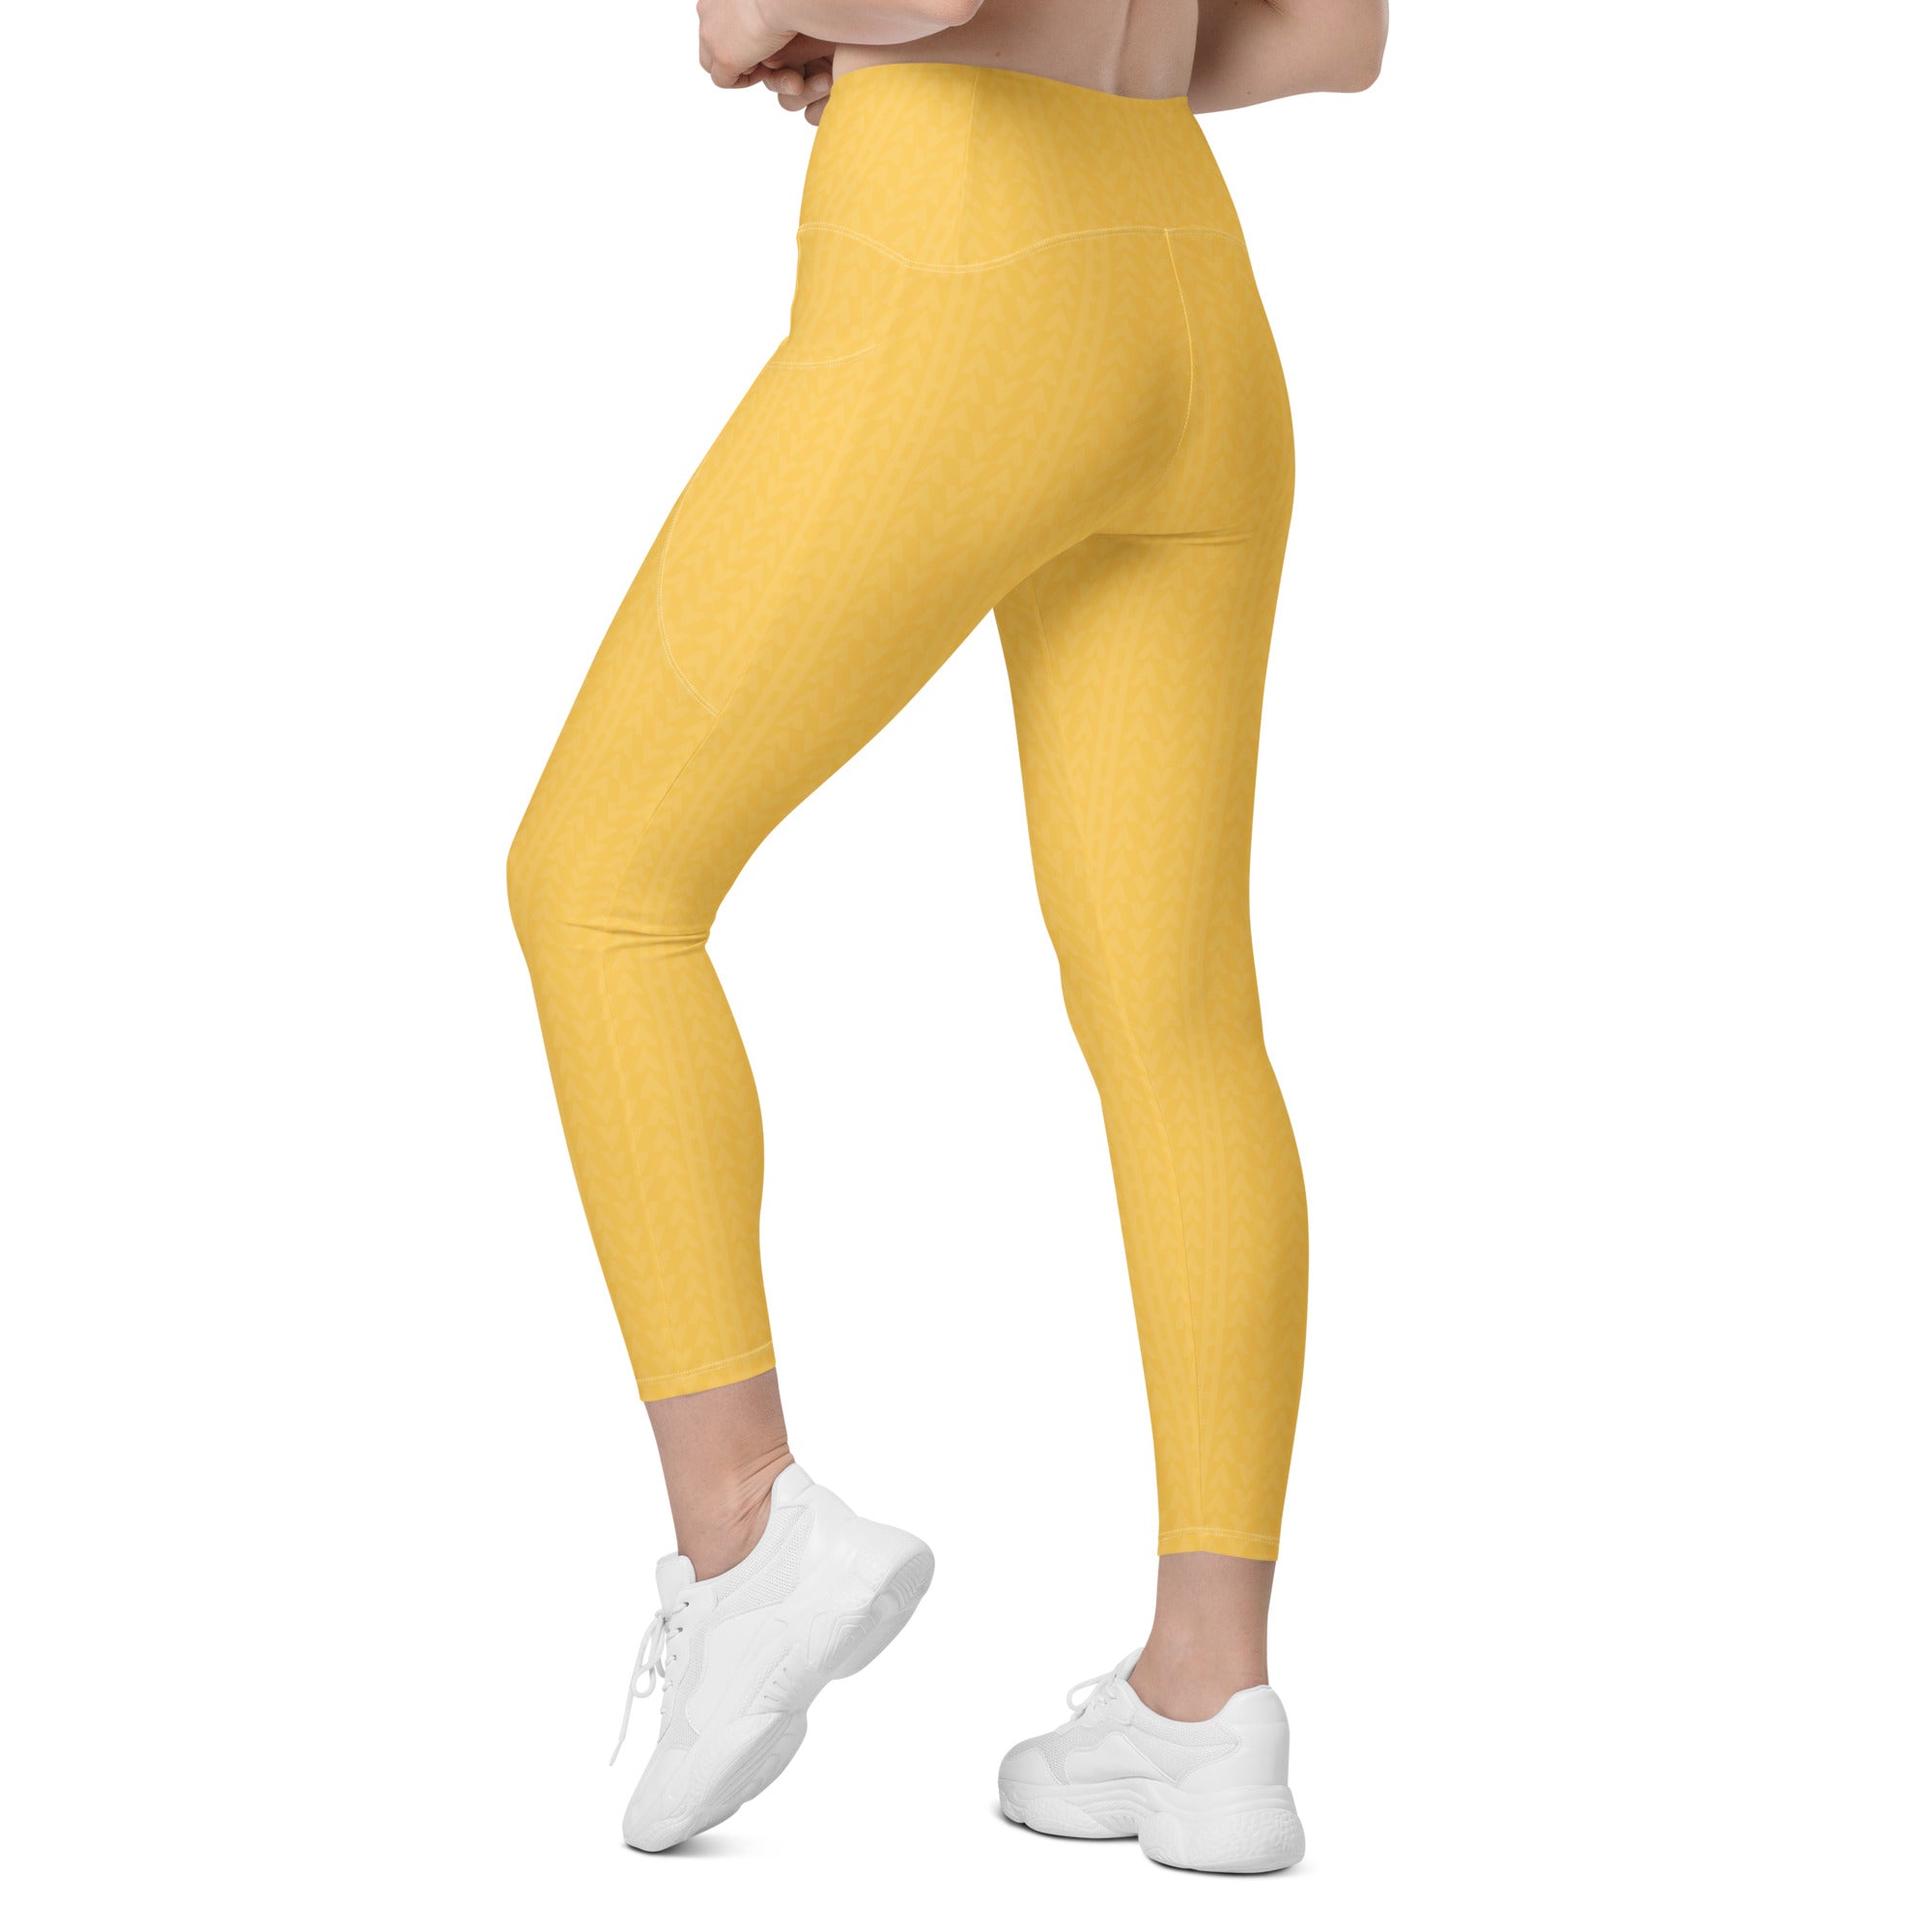 Samoa Yellow High Waisted Crossover Leggings with Pockets